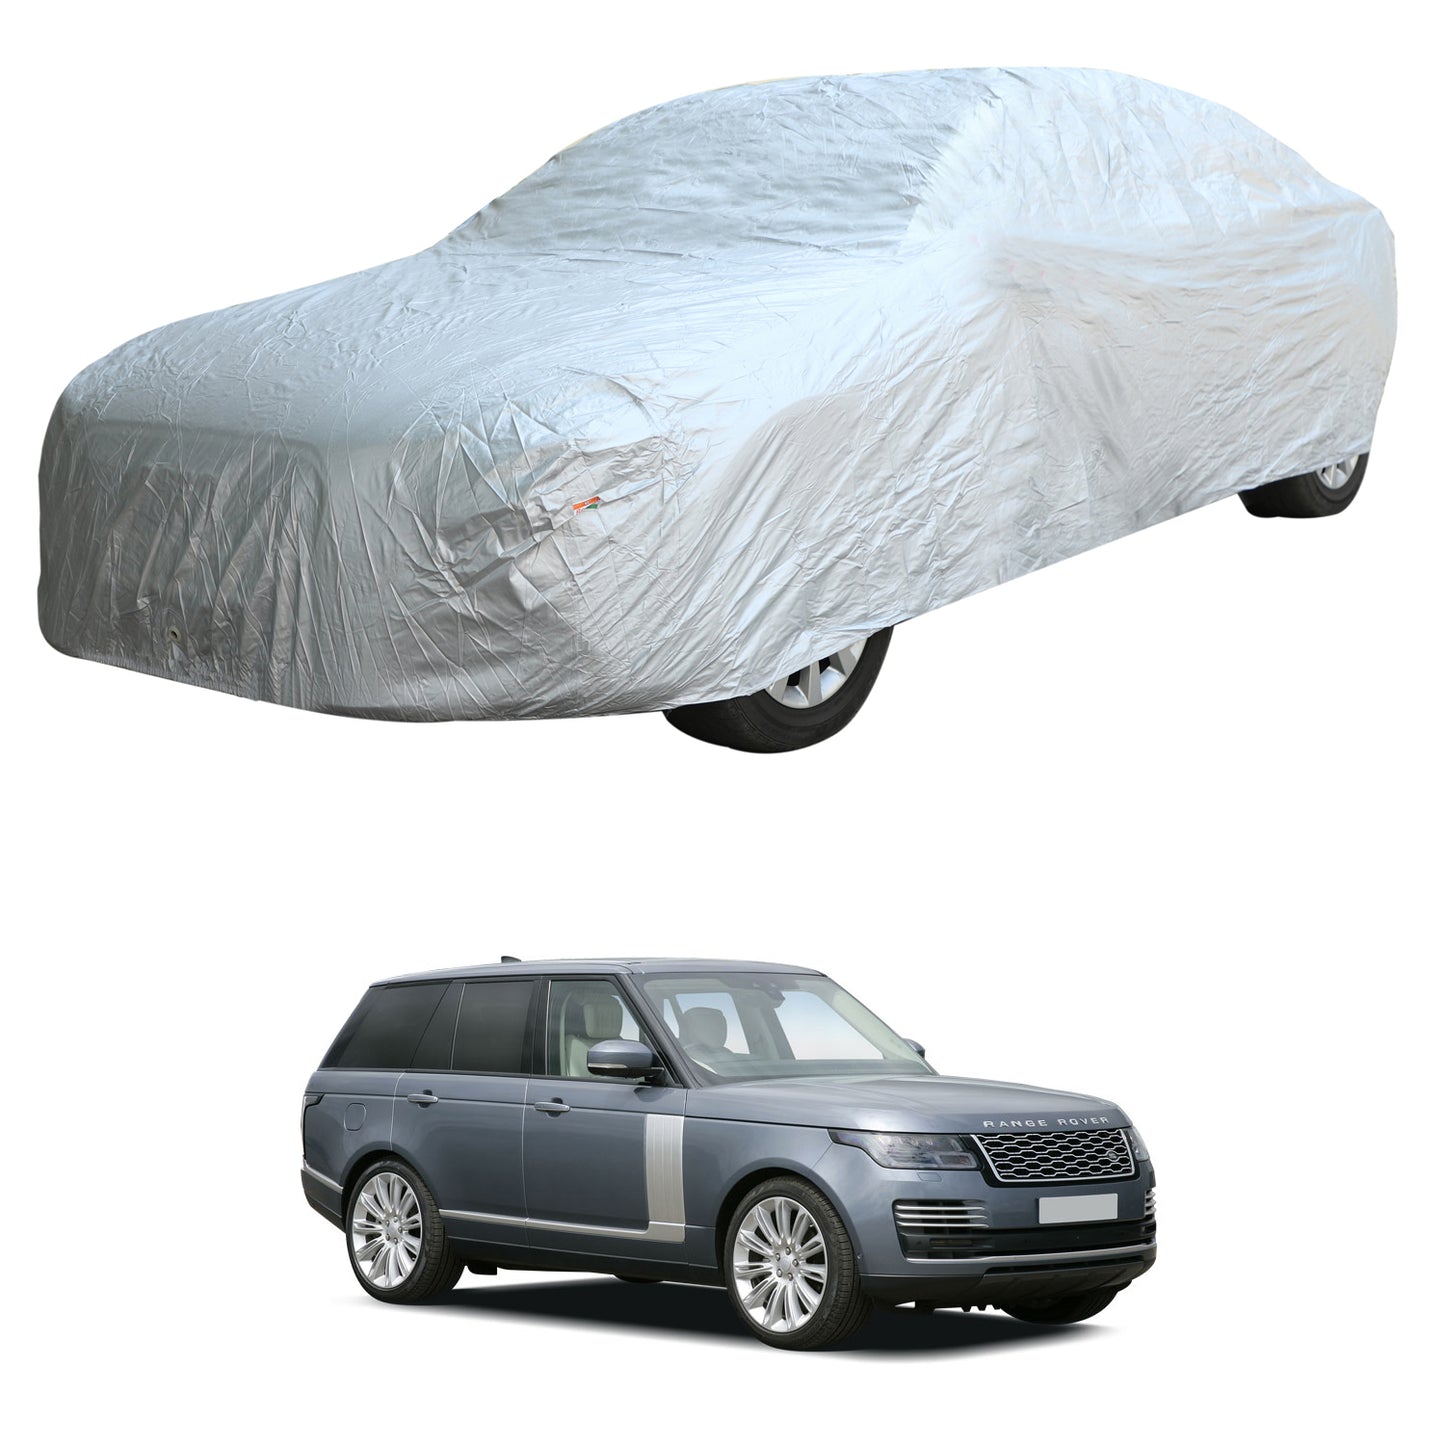 Oshotto Silvertech Car Body Cover (Without Mirror Pocket) For Range Rover Vogue